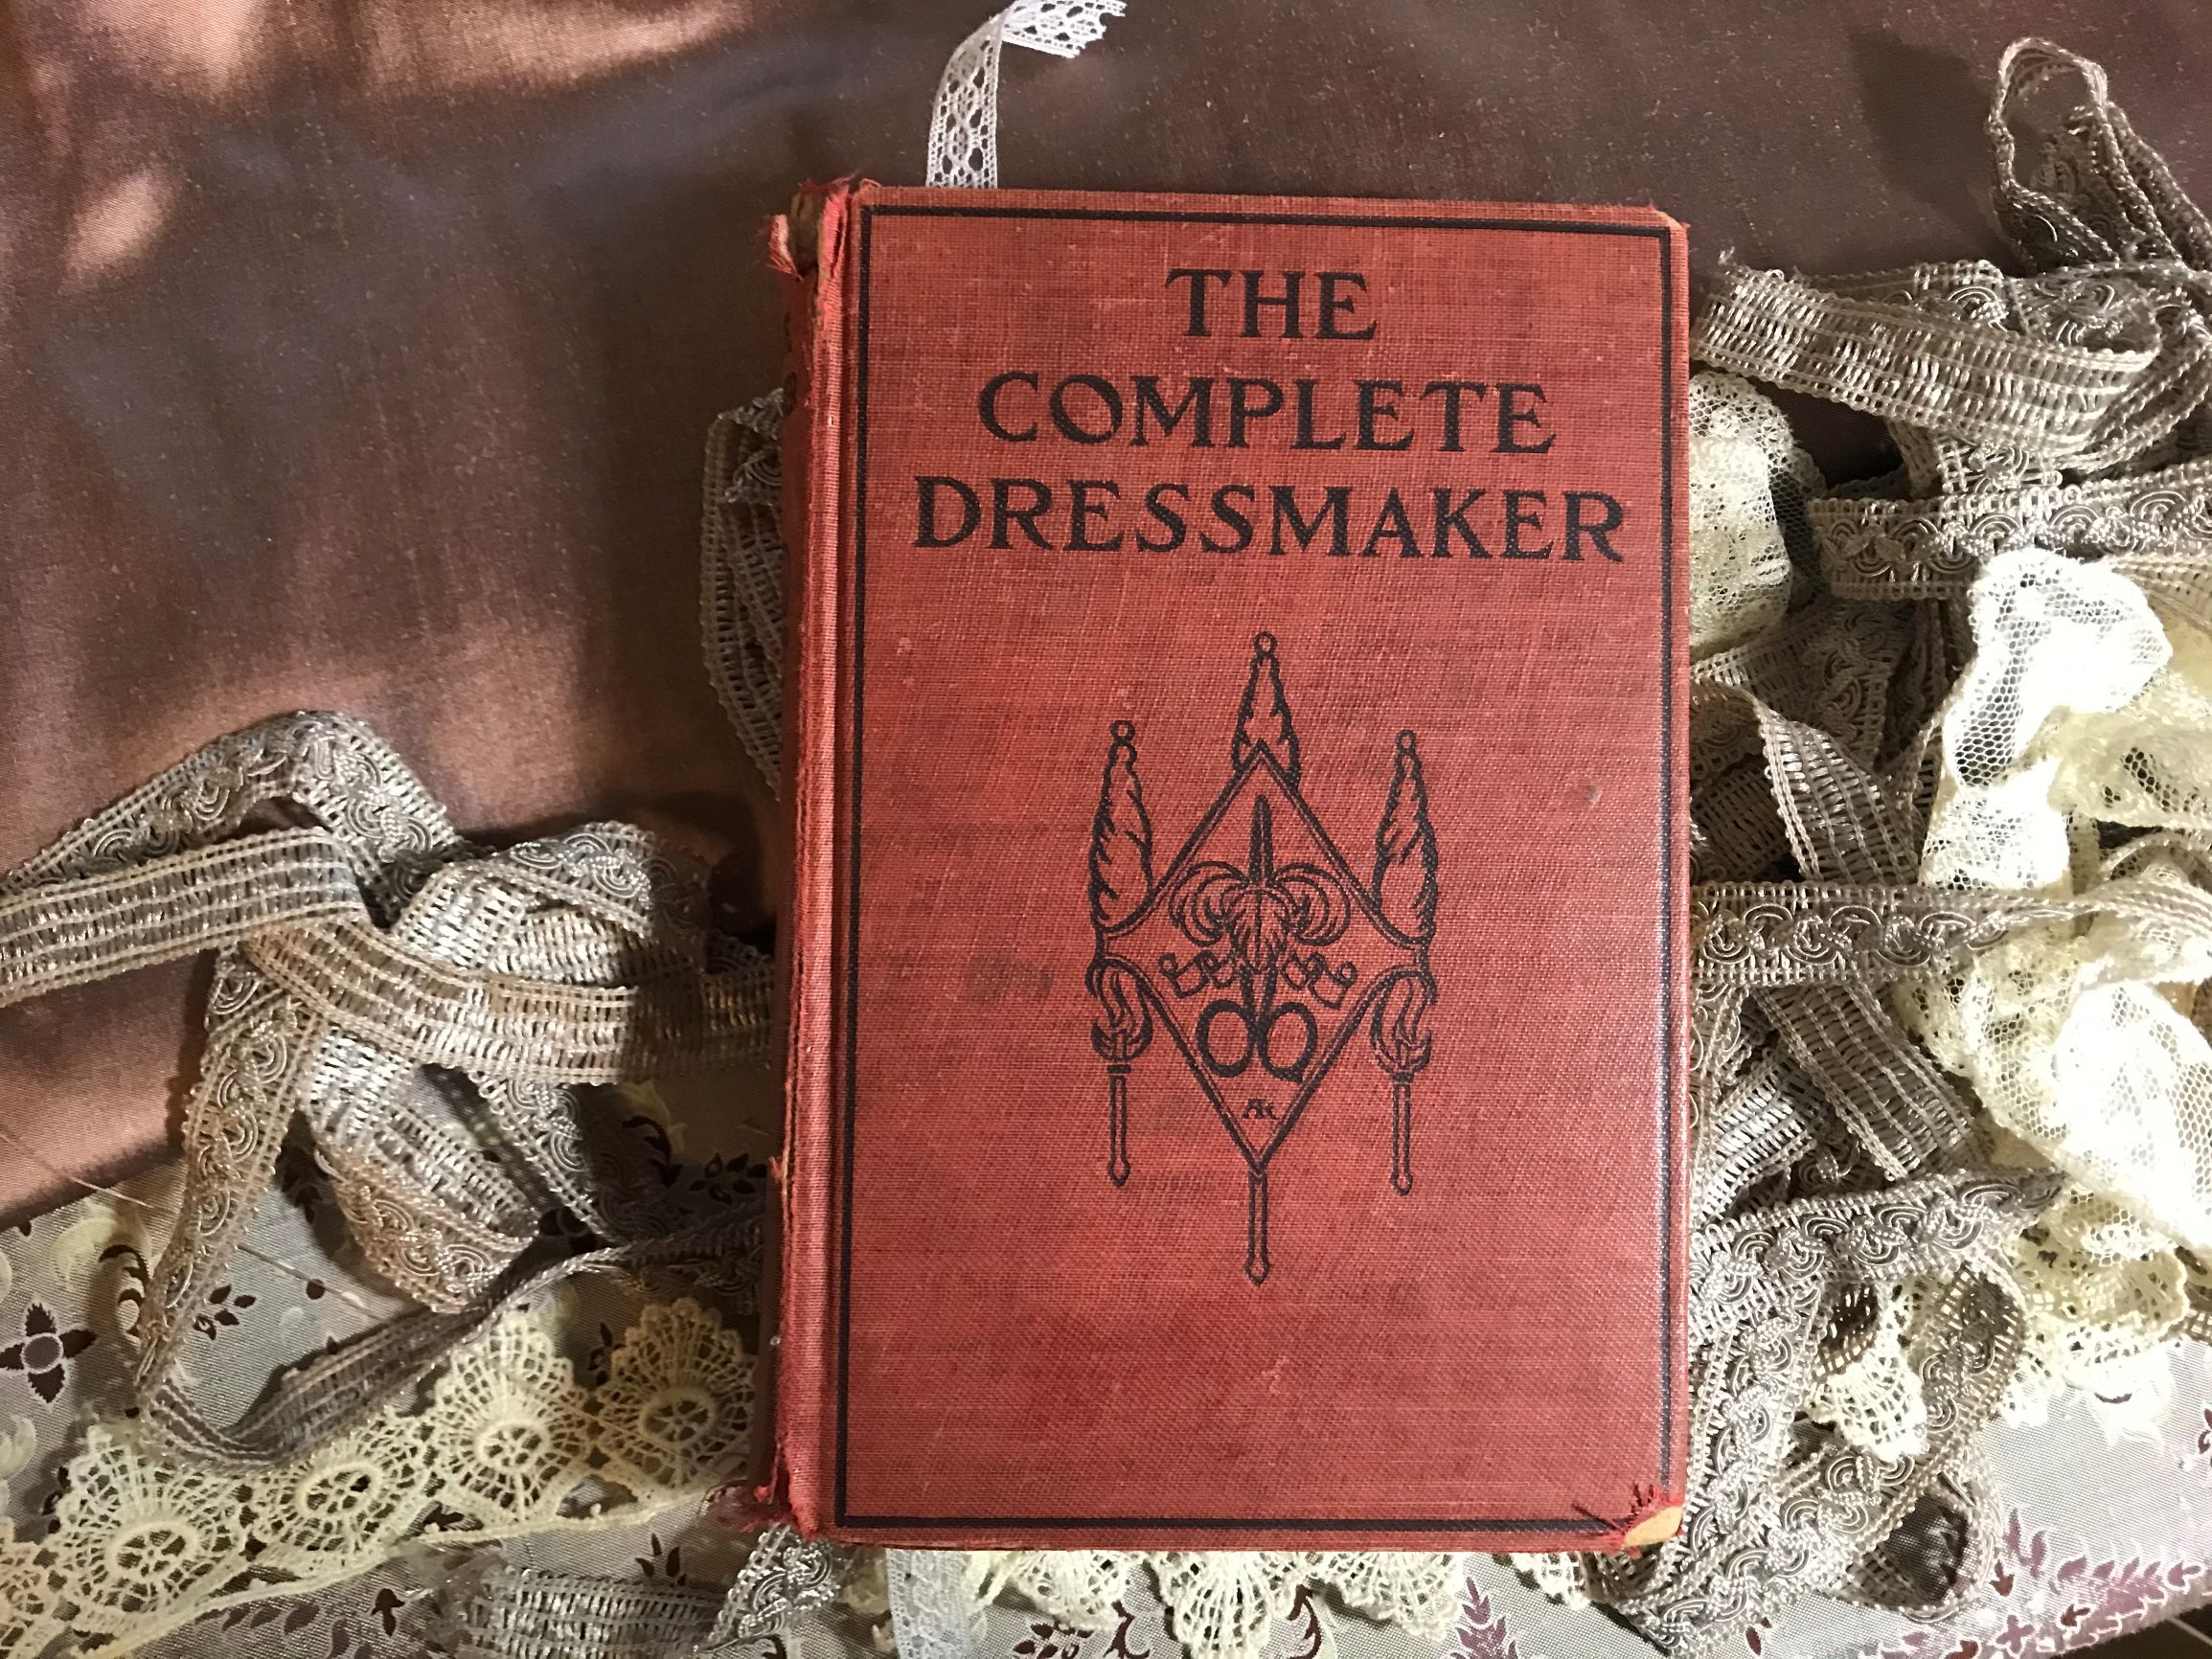 The Complete Dressmaker, 1916 edition; first published in 1907